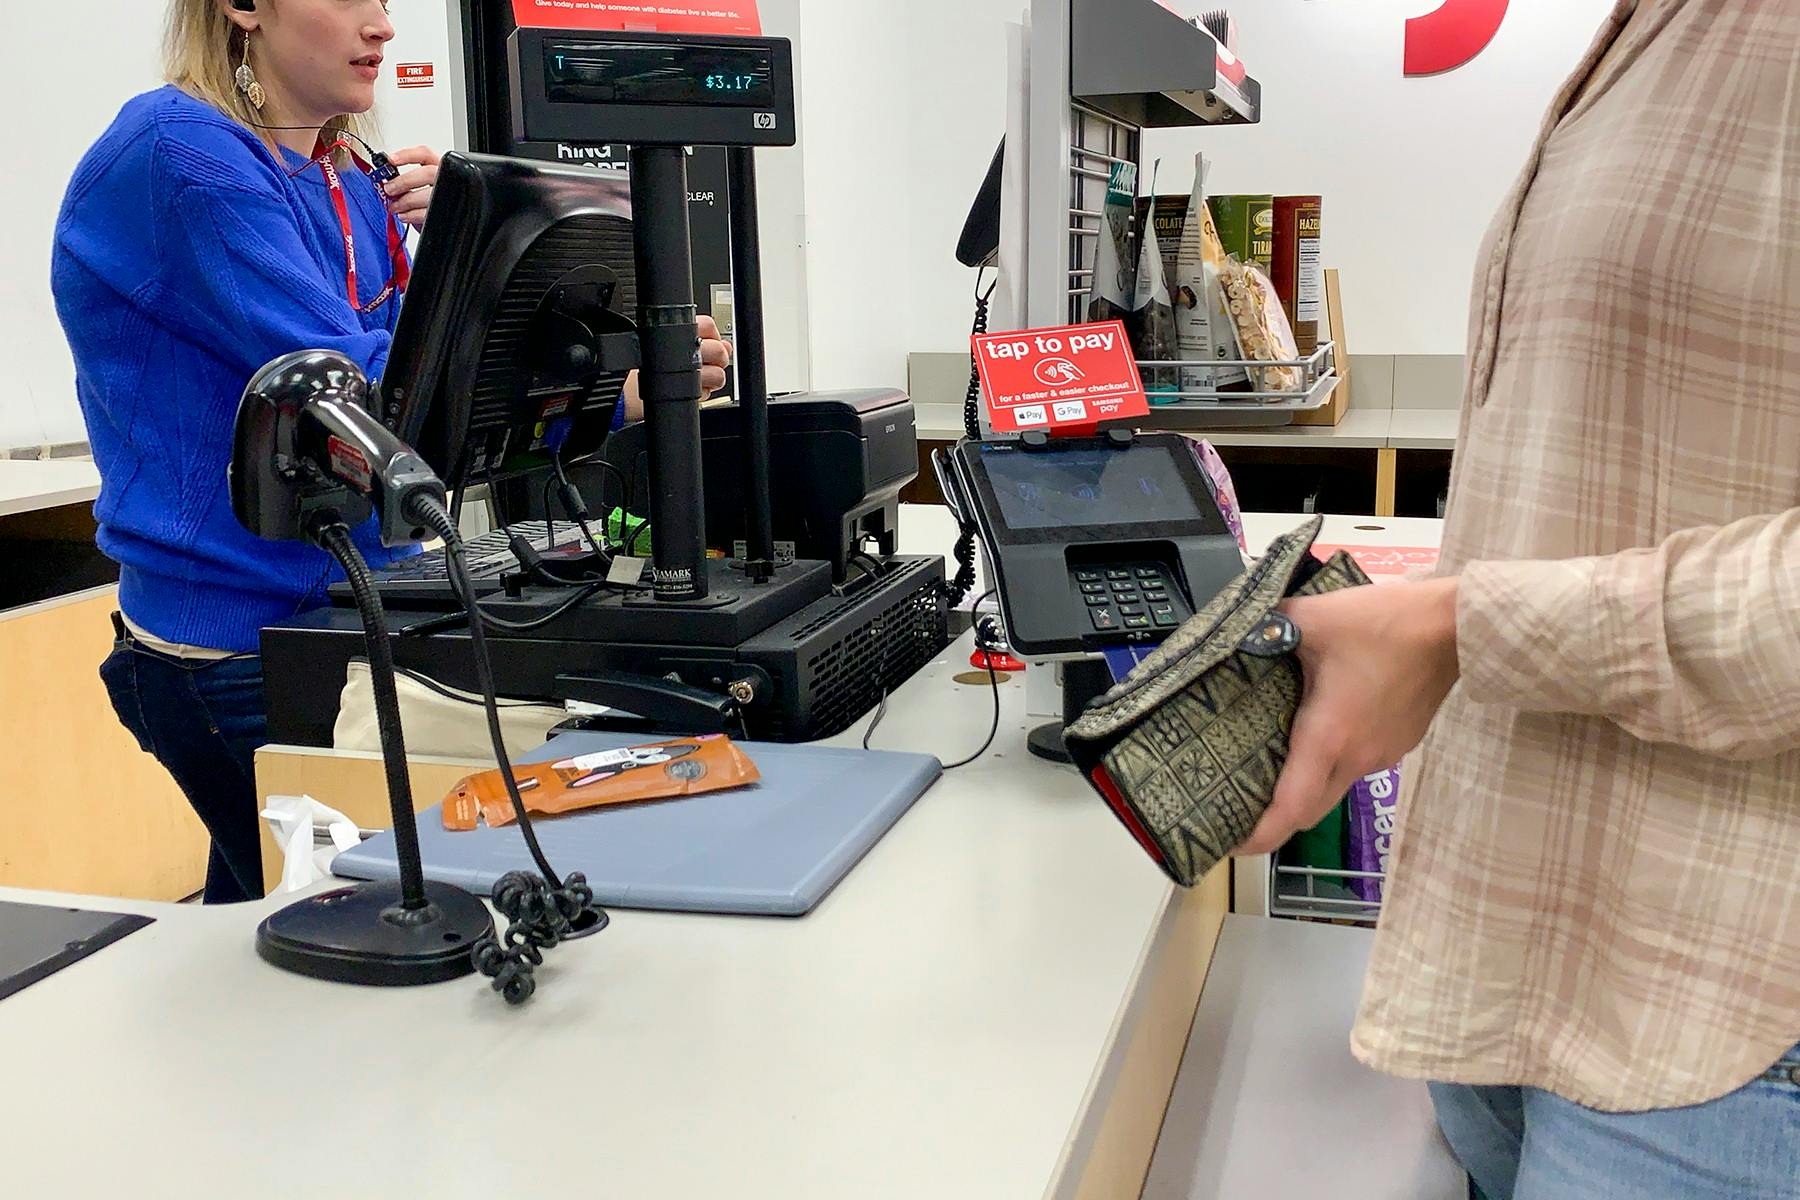 A women purchasing items at the register.